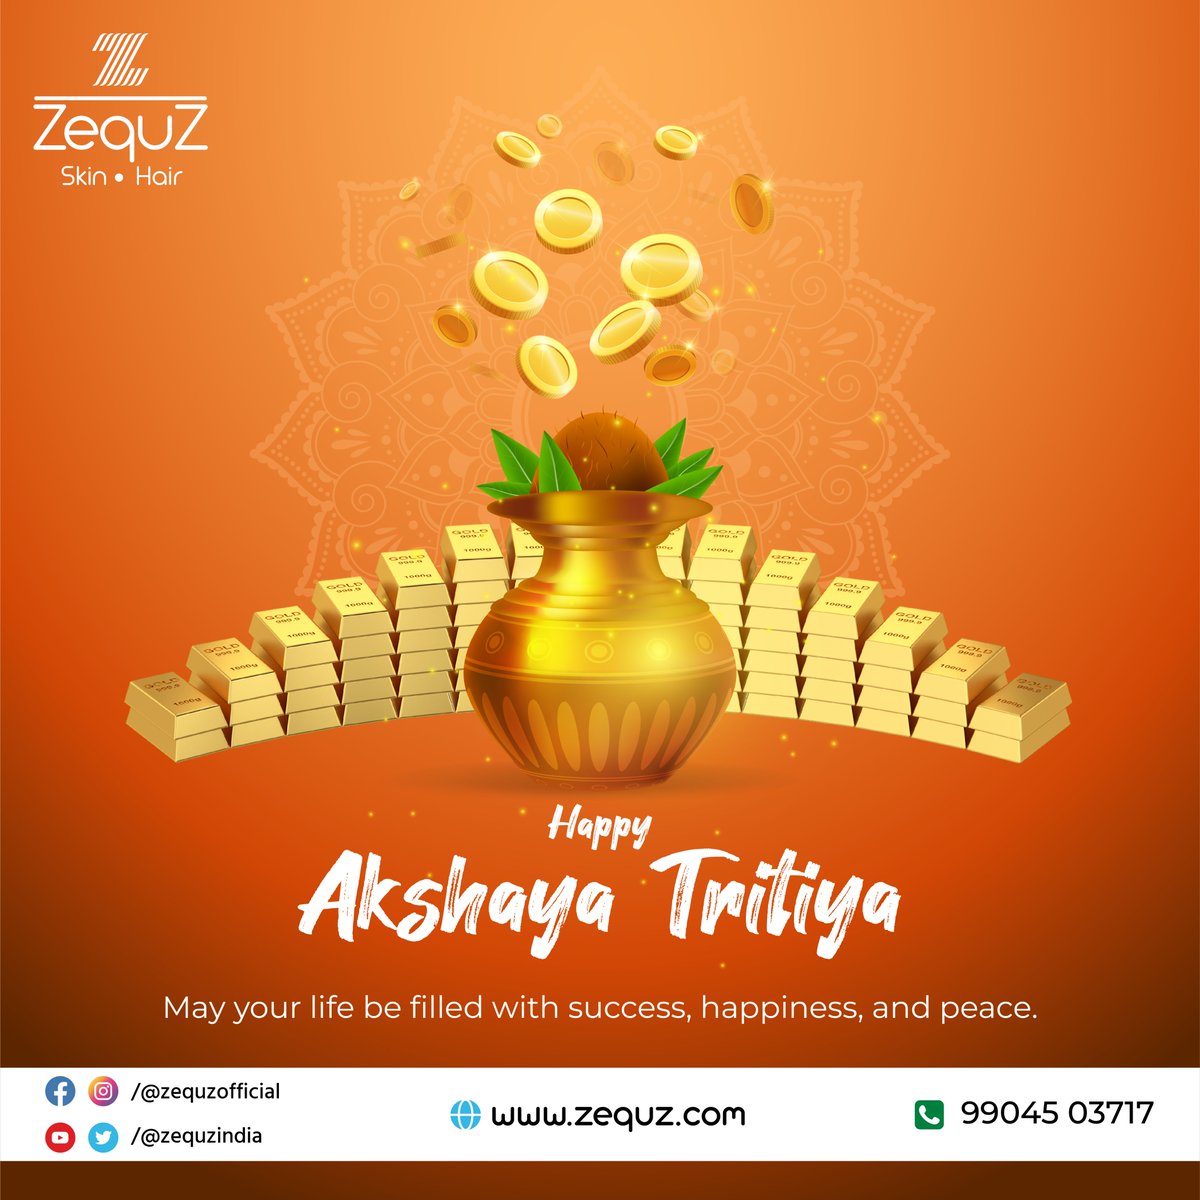 May your life be filled with success, happiness, and peace. Happy Akshaya Tritiya!

Visit our website: Link in Bio!

#AkshayTritiya #festival #jewellery #beautyproducts #dailyuseonlyzequz